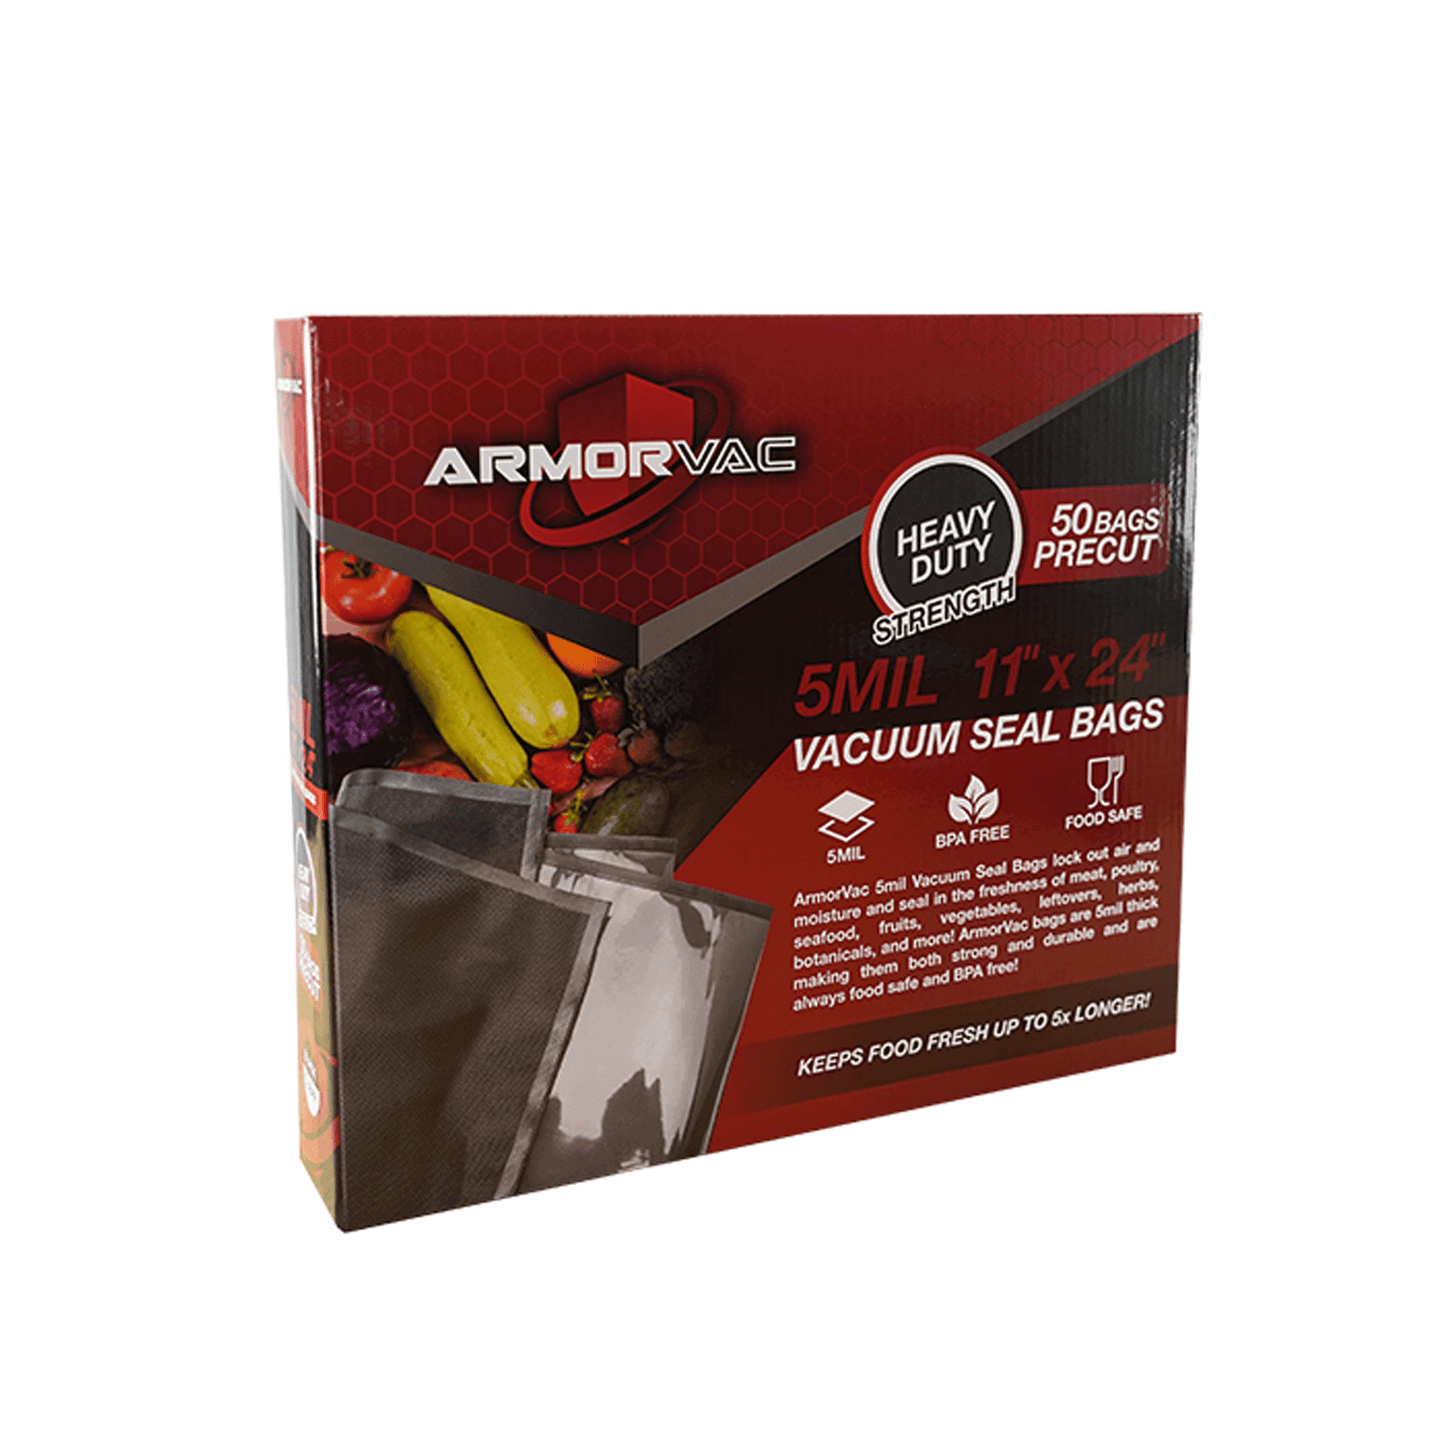 ArmorVac 11"x24" 5mil Precut Vacuum Seal Bags Black & Clear (50 Pack) 131124BCR50 Harvest & Extraction